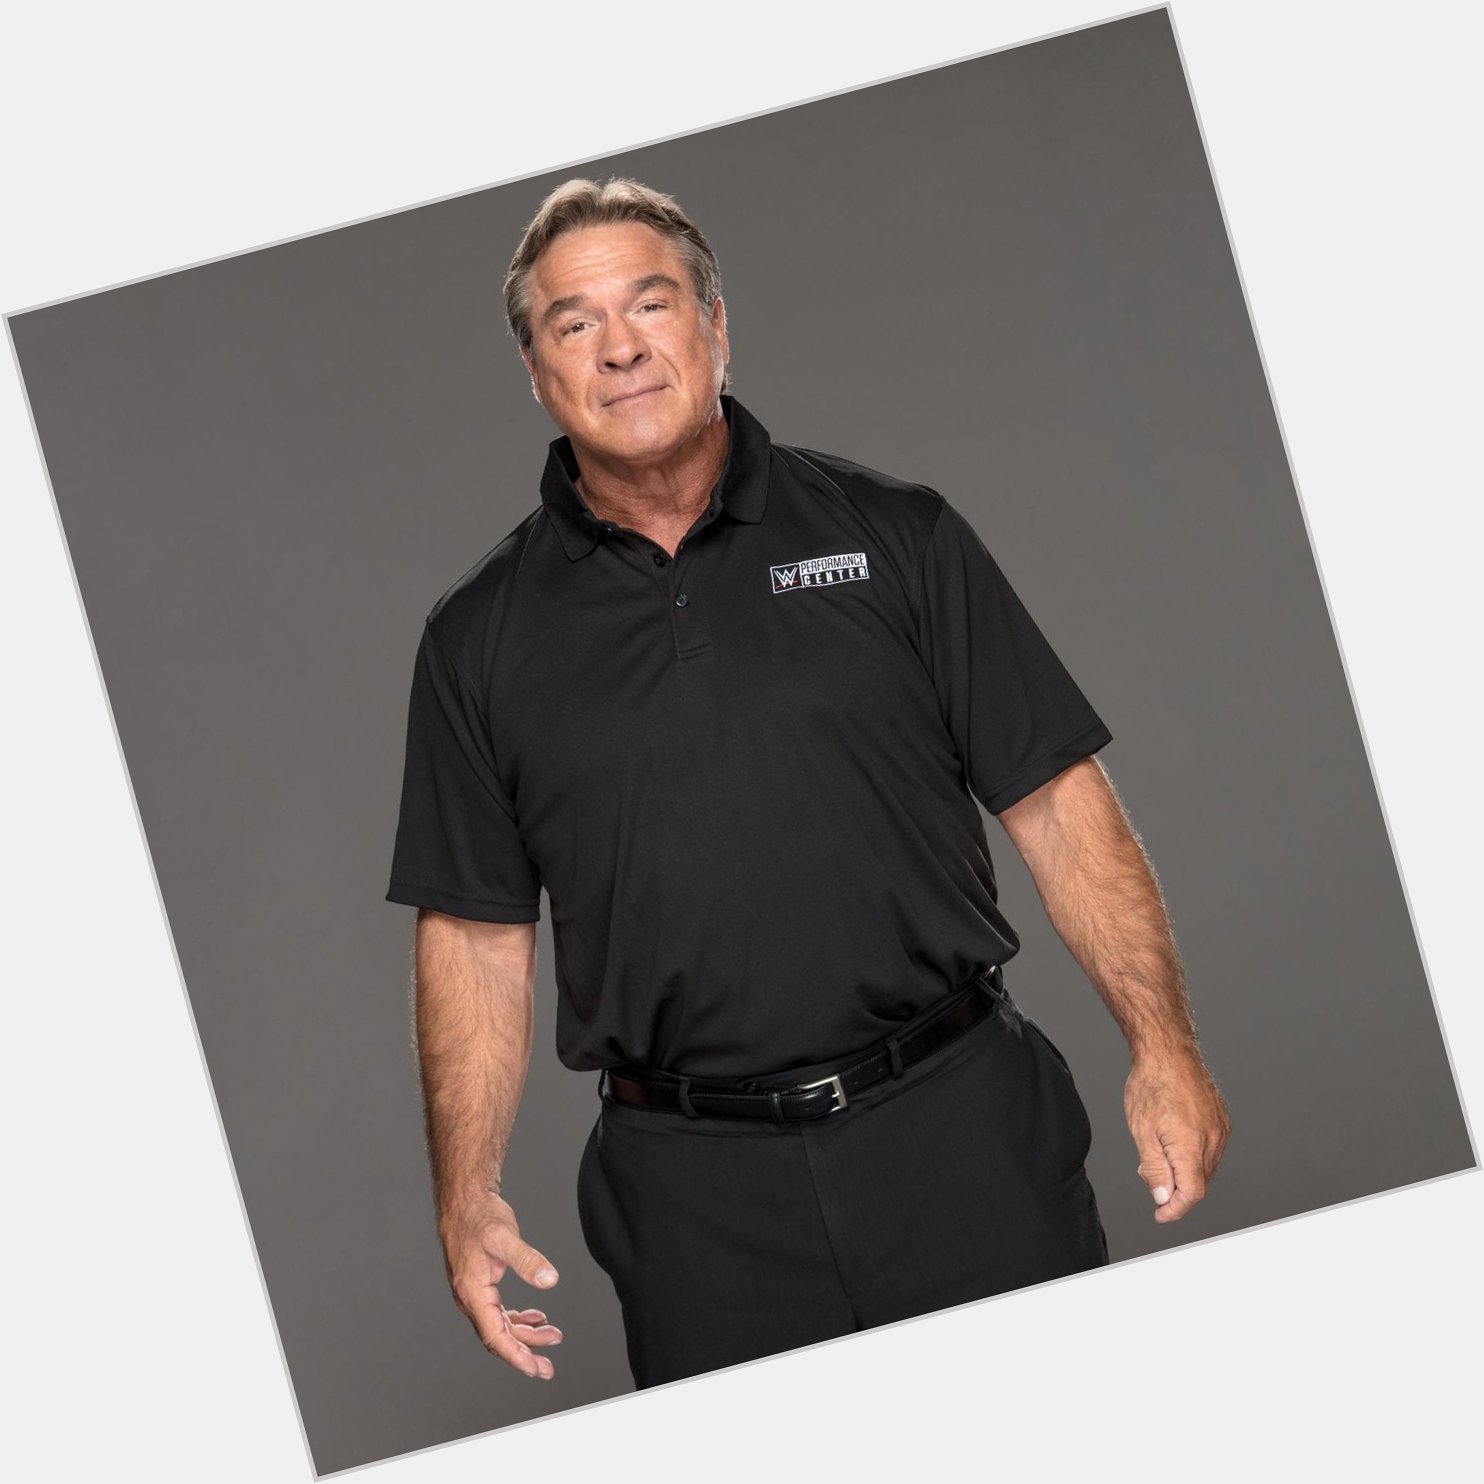 Wishing a very Happy Birthday to Terry Taylor! 